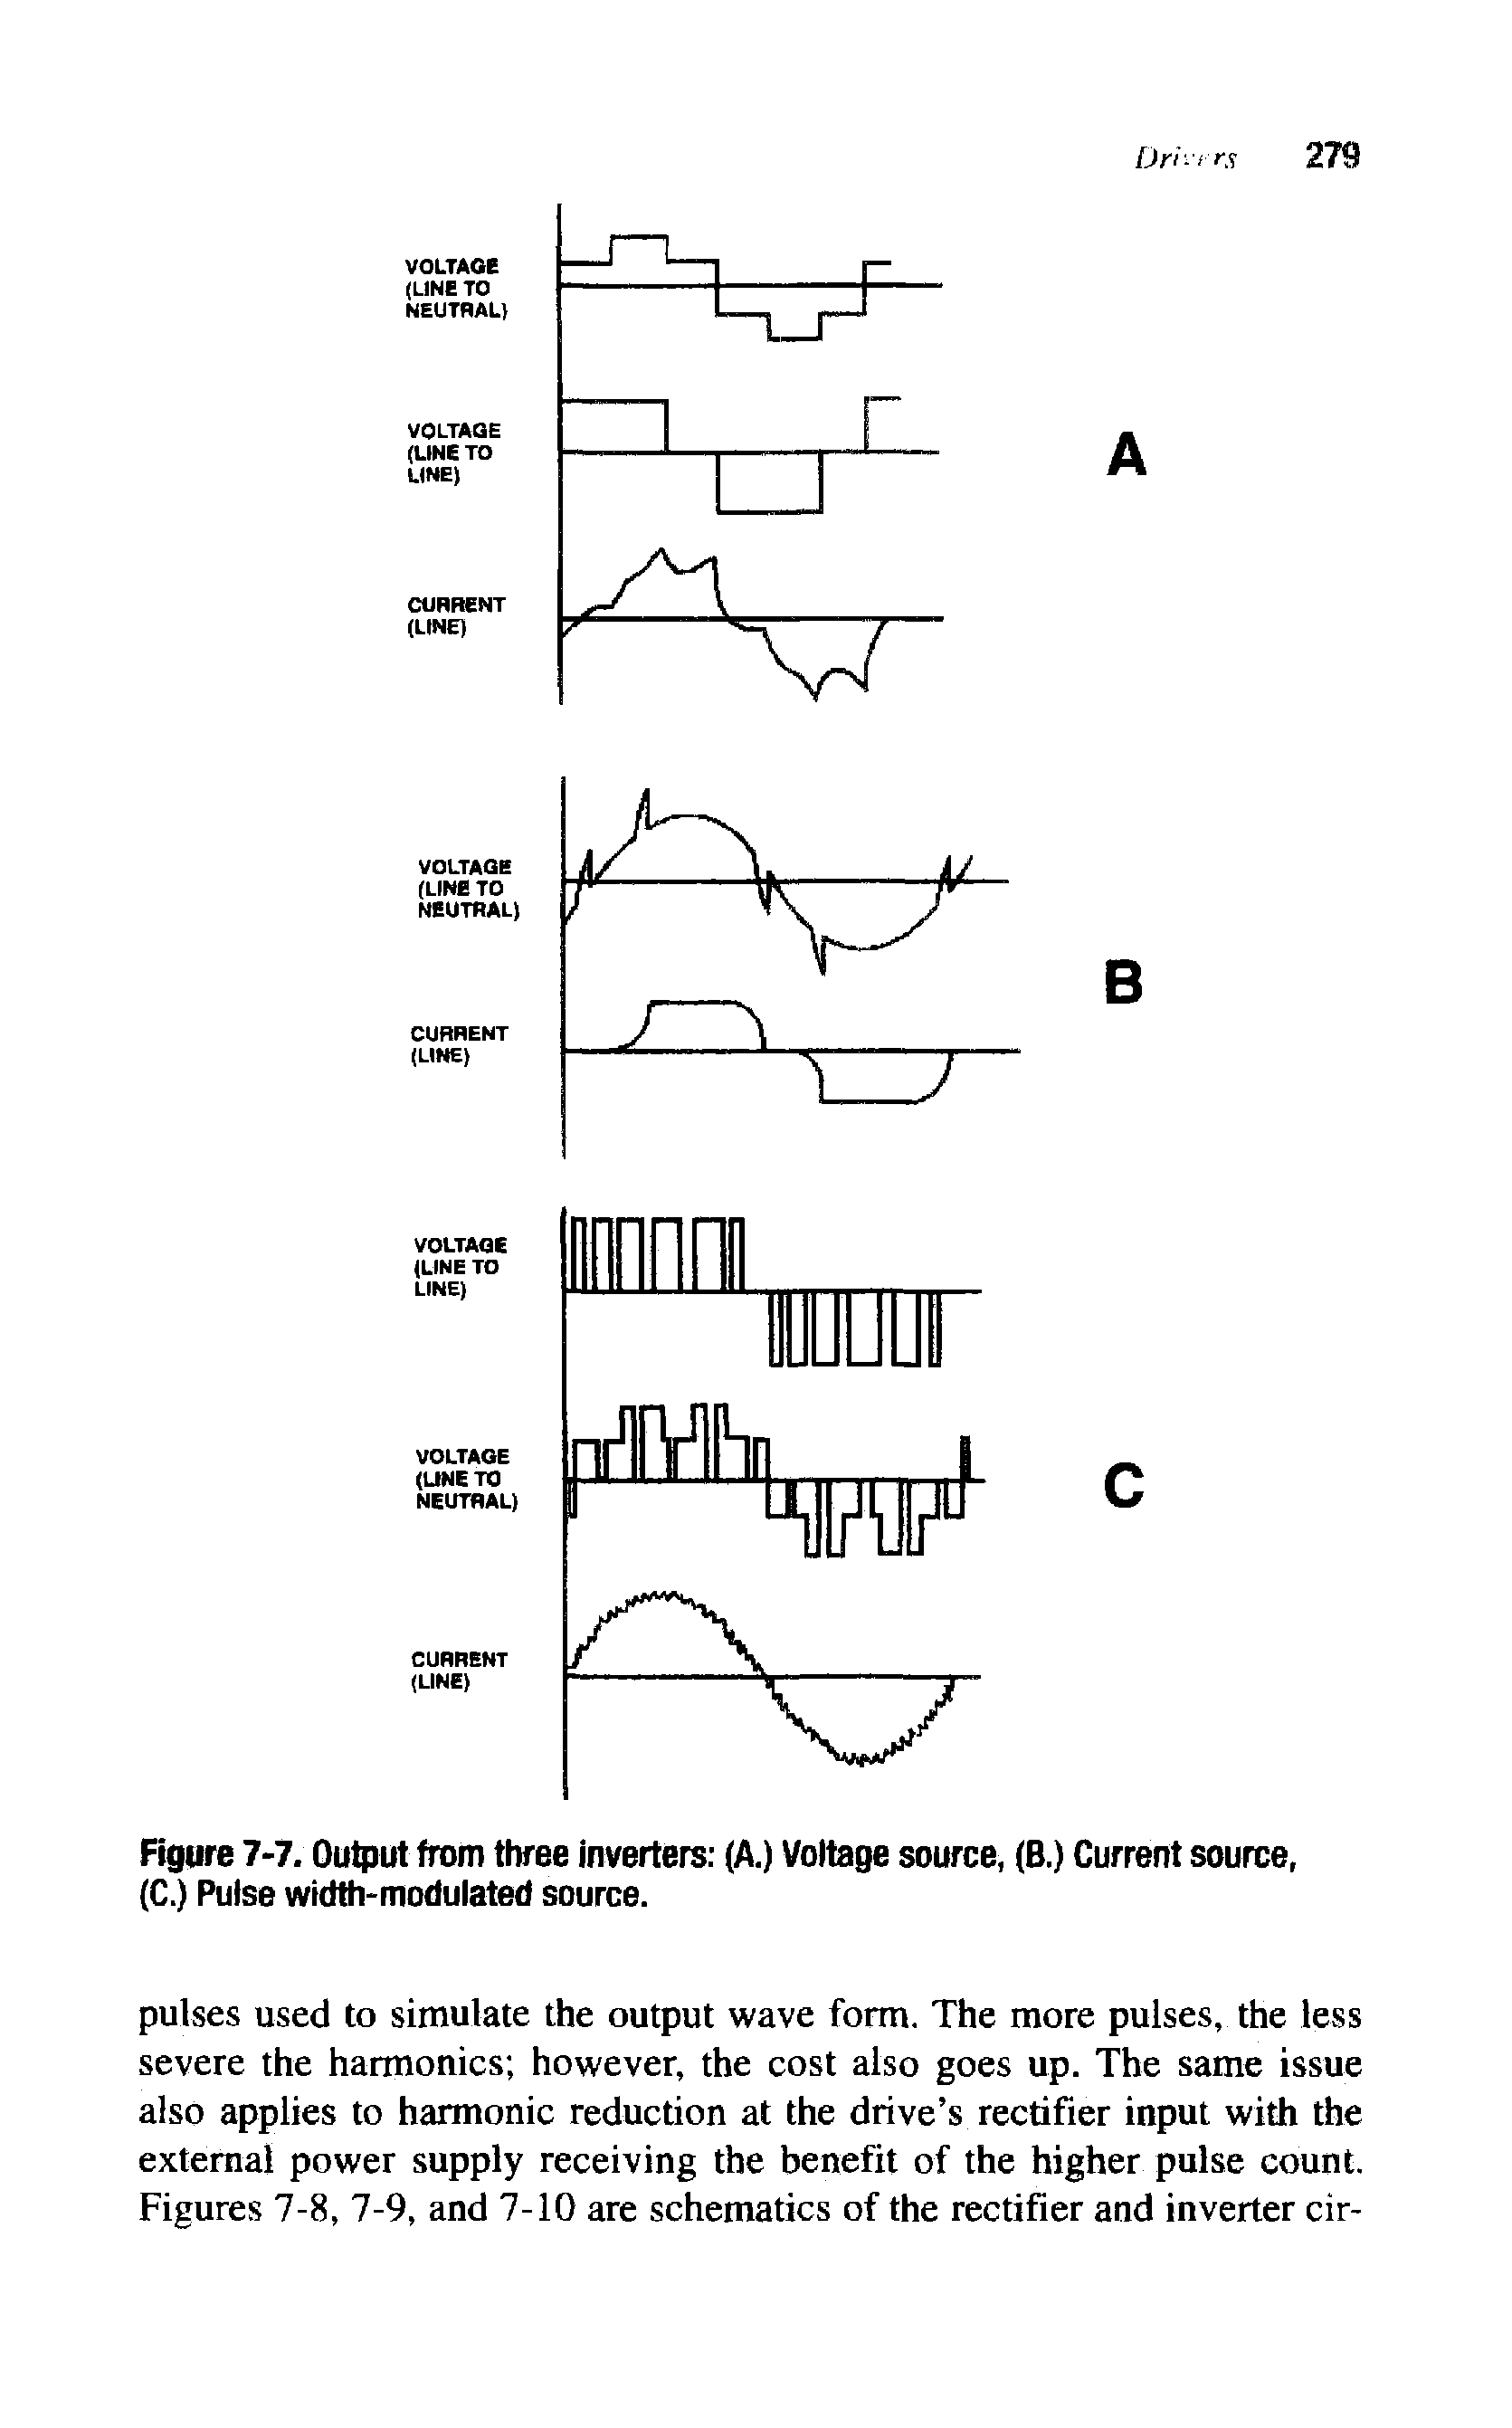 Figure 7-7. Output from three inverters (A.) Voltage source, (B.) Current source, (C.) Pulse width-modulated source.